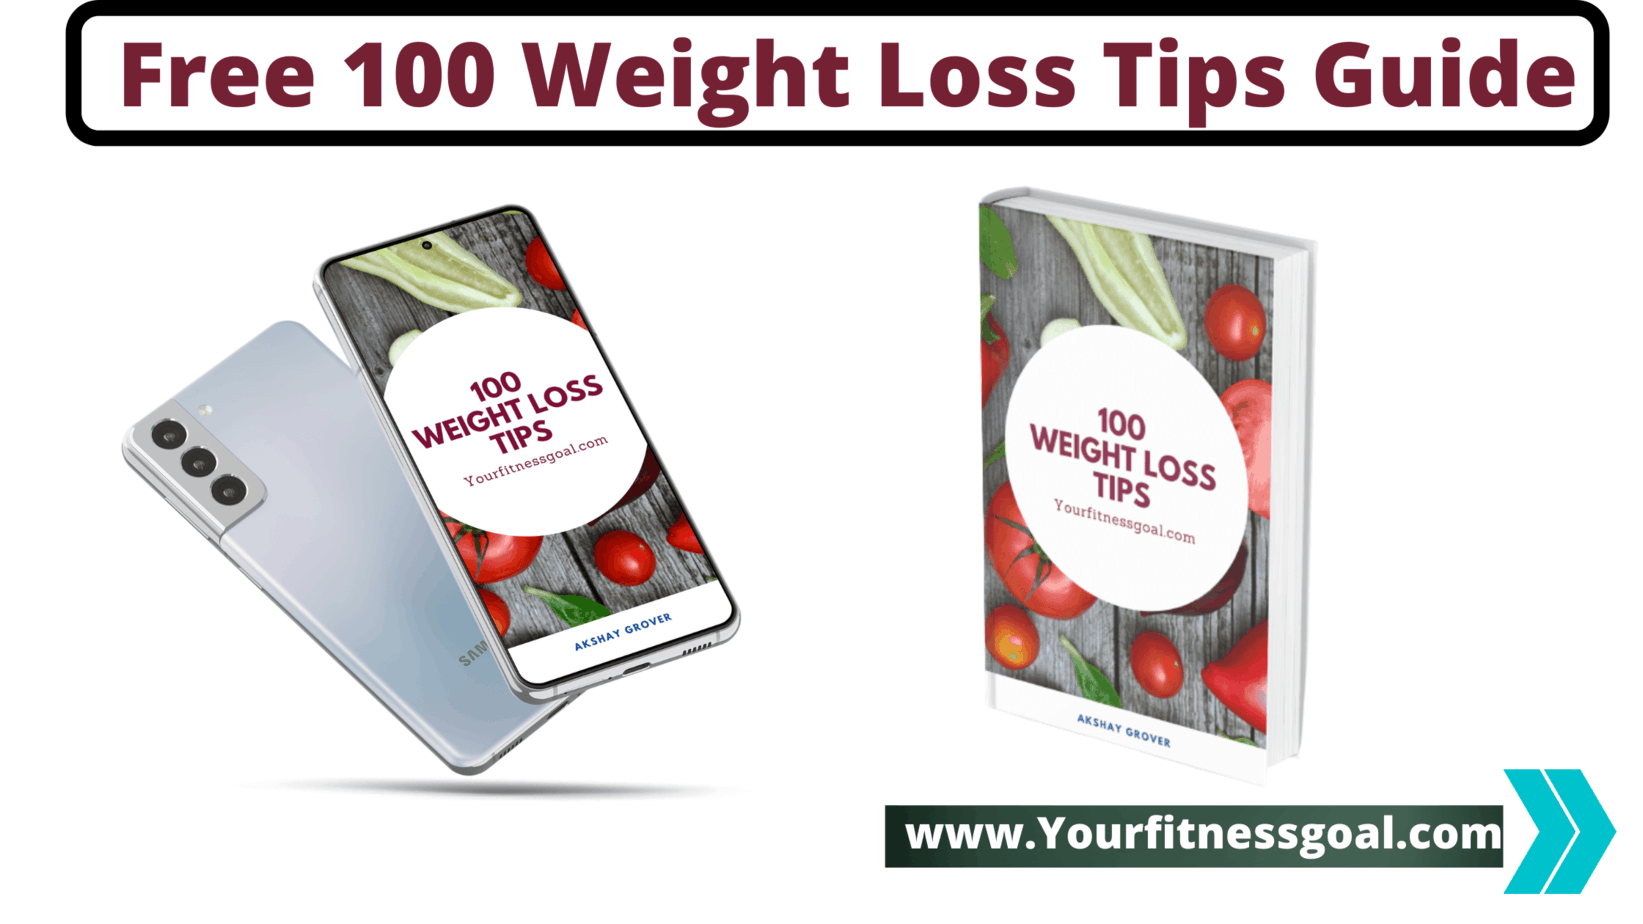 Free 100 Weight Loss Tips Guide